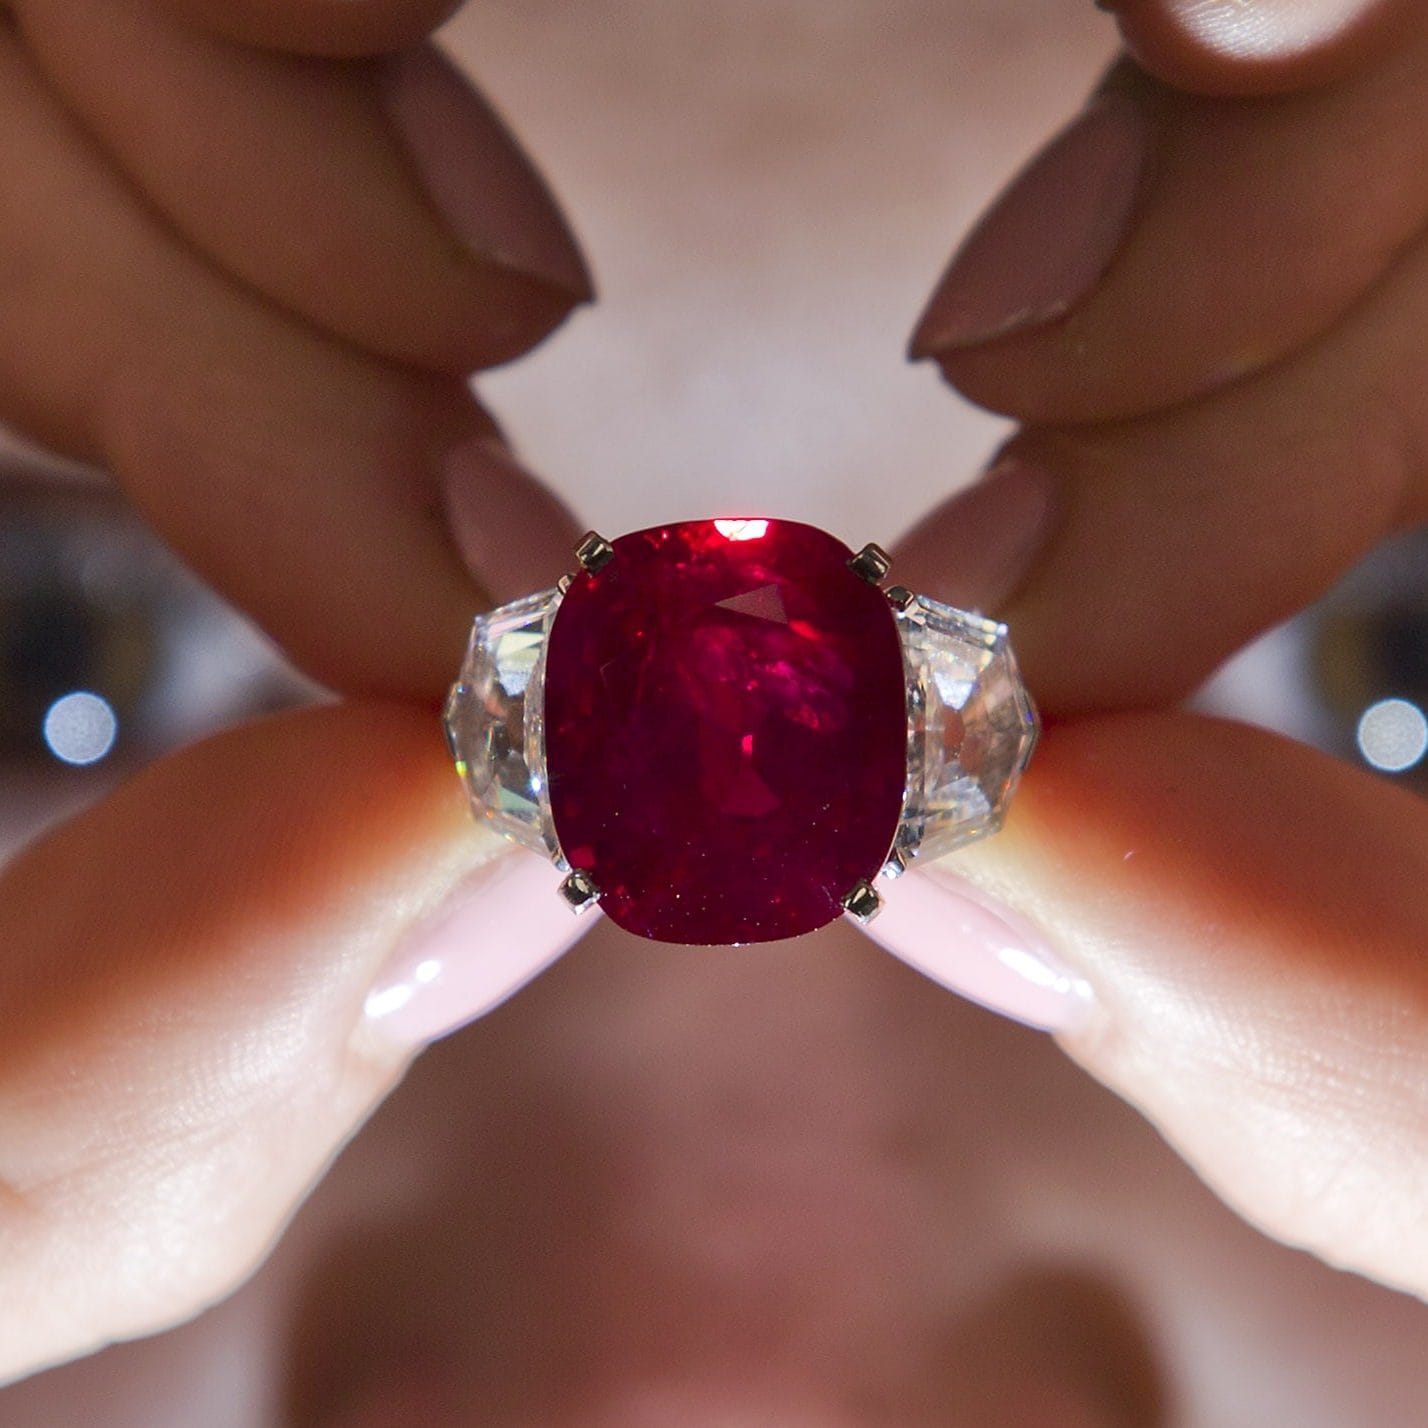 Cartier Sunrise Ruby Ring Fetching an impressive £19.6 million at auction in 2019, this blood-red gem is truly unique and one-of-a-kind. With a beautiful framing of diamonds to accompany the huge and eye-catching gem. In this case, it’s the rarity of the piece, and the beautiful gem that leads to such a significant price – these kinds of rubies are so sought-after that their price is only likely to increase over time, too.